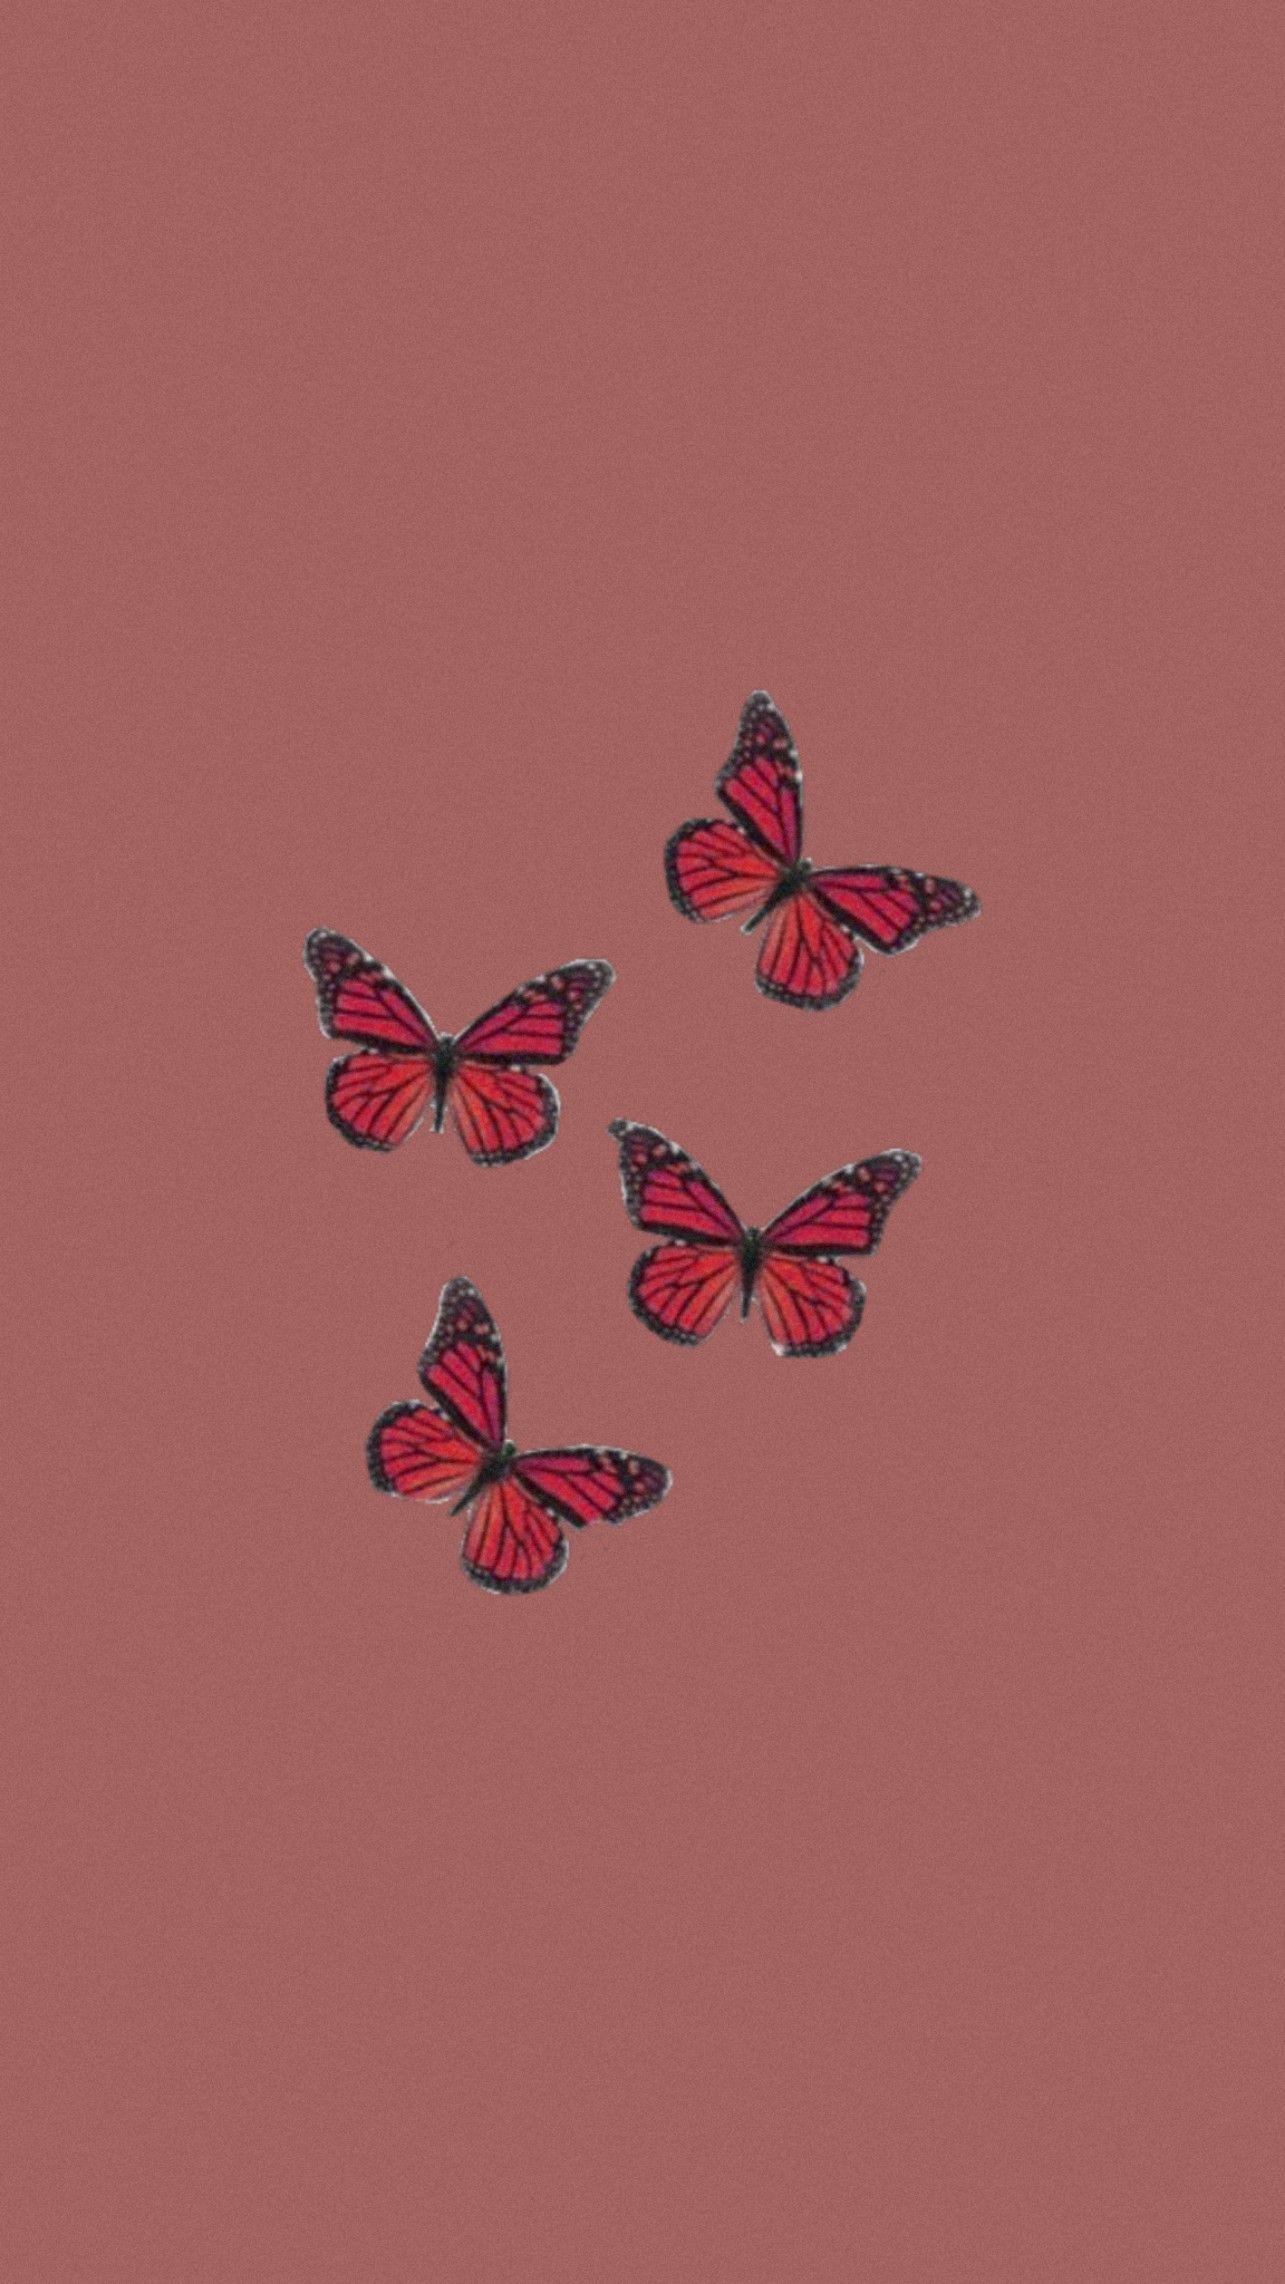 Gucci Butterfly Wallpapers - Top Free Gucci Butterfly Backgrounds ...